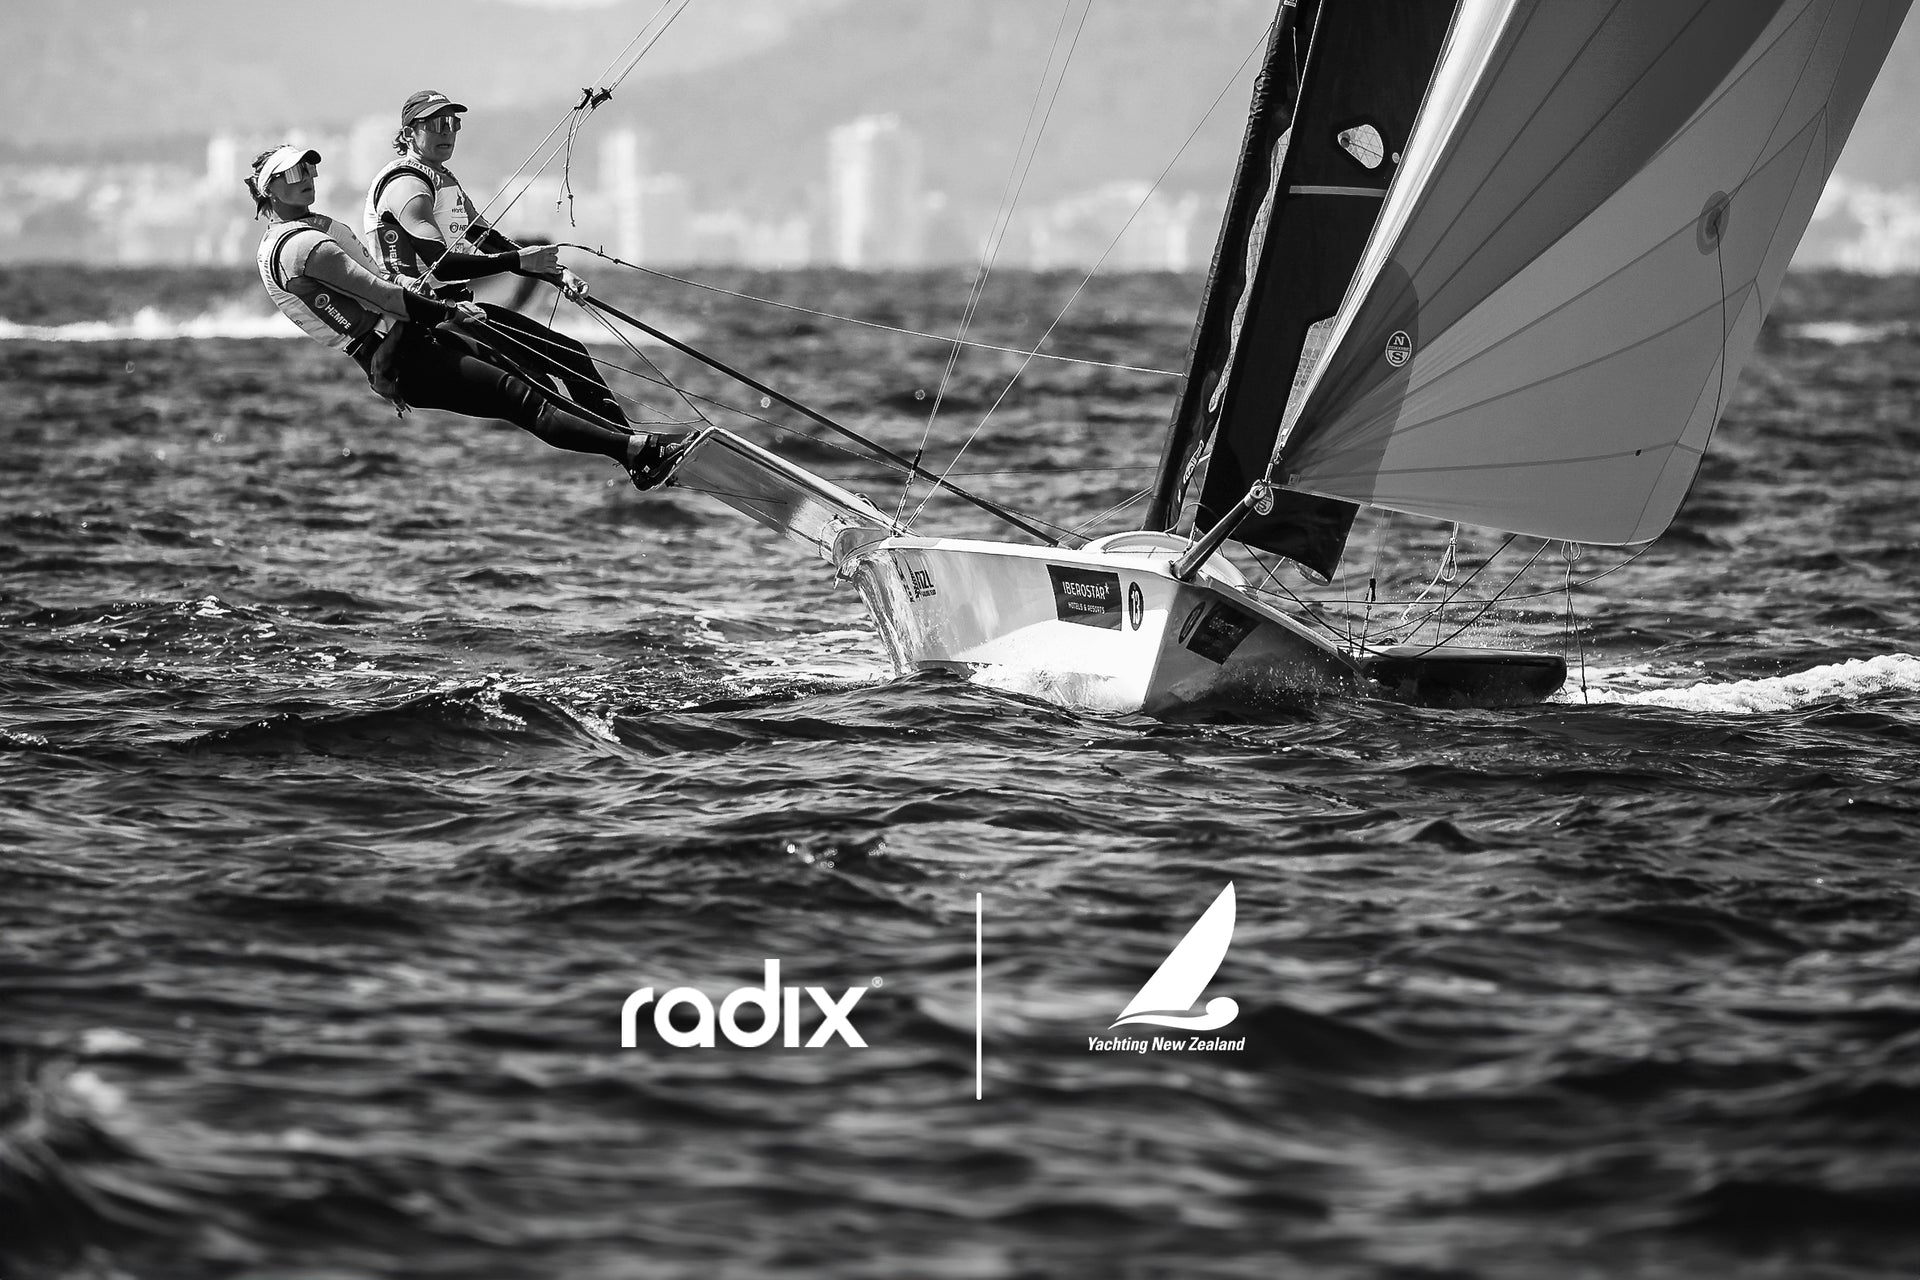 Fuelling champions: Yachting NZ, Radix Nutrition join forces